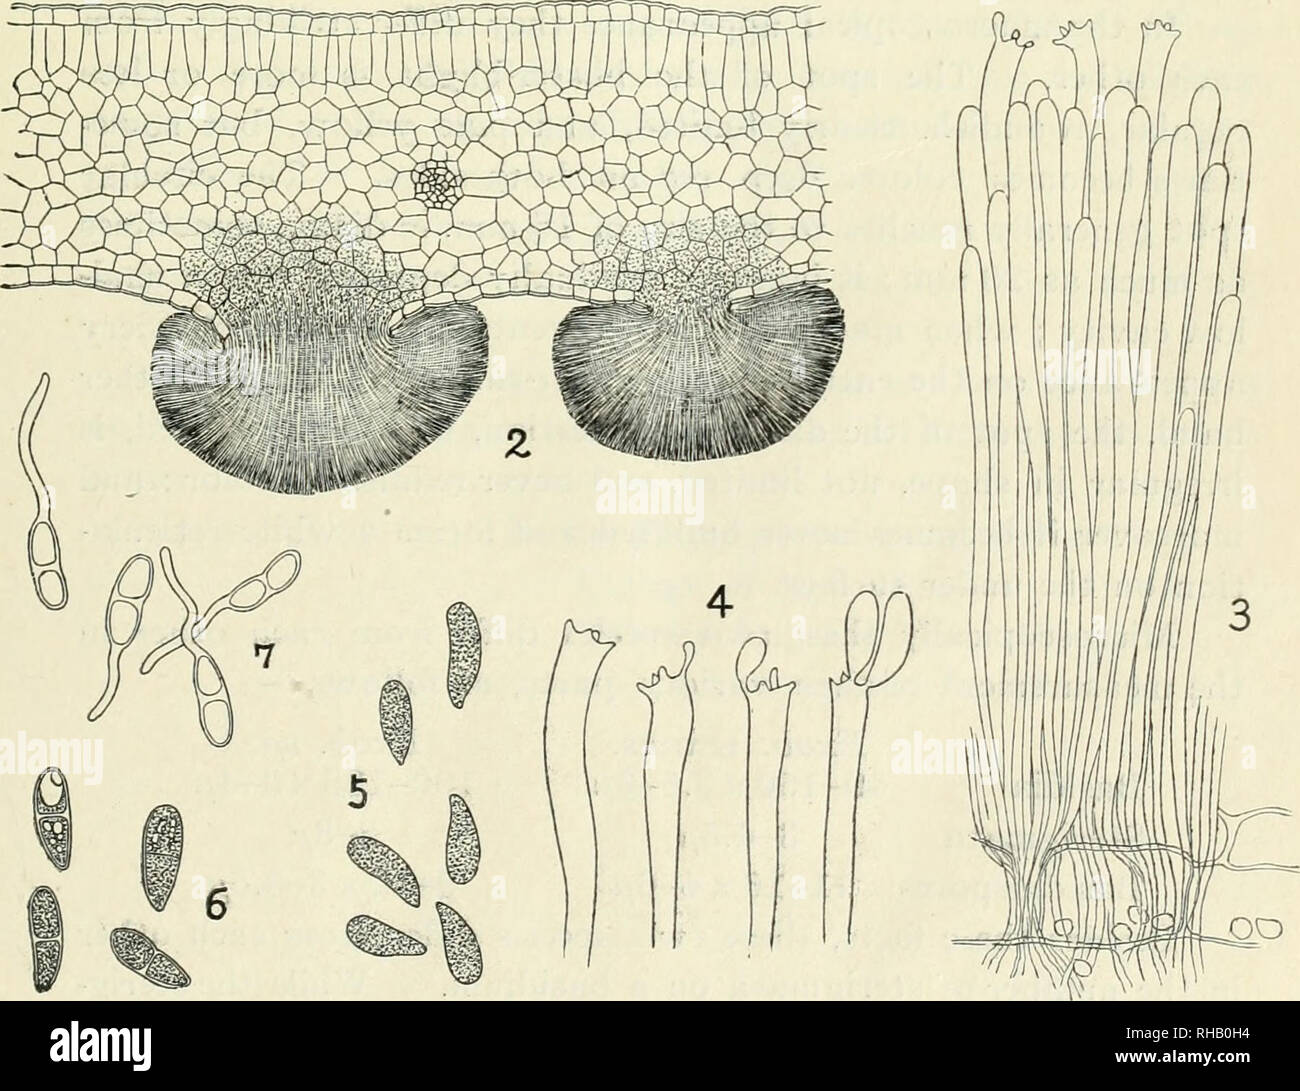 . The Botanical magazine. Plants; Plants -- Japan. August 1912.] s. ITO. AND K. SAW AD A.—A NEW EXO B AS ID IUM-D fSEASE 239 A section through the diseased spot shows the hyphae to be ramifying in the tissue of the leaf and the chloroplastids des- troyed. The hymenium is about 70-90?in thickness. (Fig. 2.) The basidia are cylindrical clavate in shape, and usually produce four sterigmata on the apex. The basidia measure 100-135,&quot; X 3—?&quot;?and the sterigmata 2-3// in length. Each stenVma supports a basidiospore. (Fig. 3, 4.) The basidiospores are oblong-obovate in shape, straight or more Stock Photo